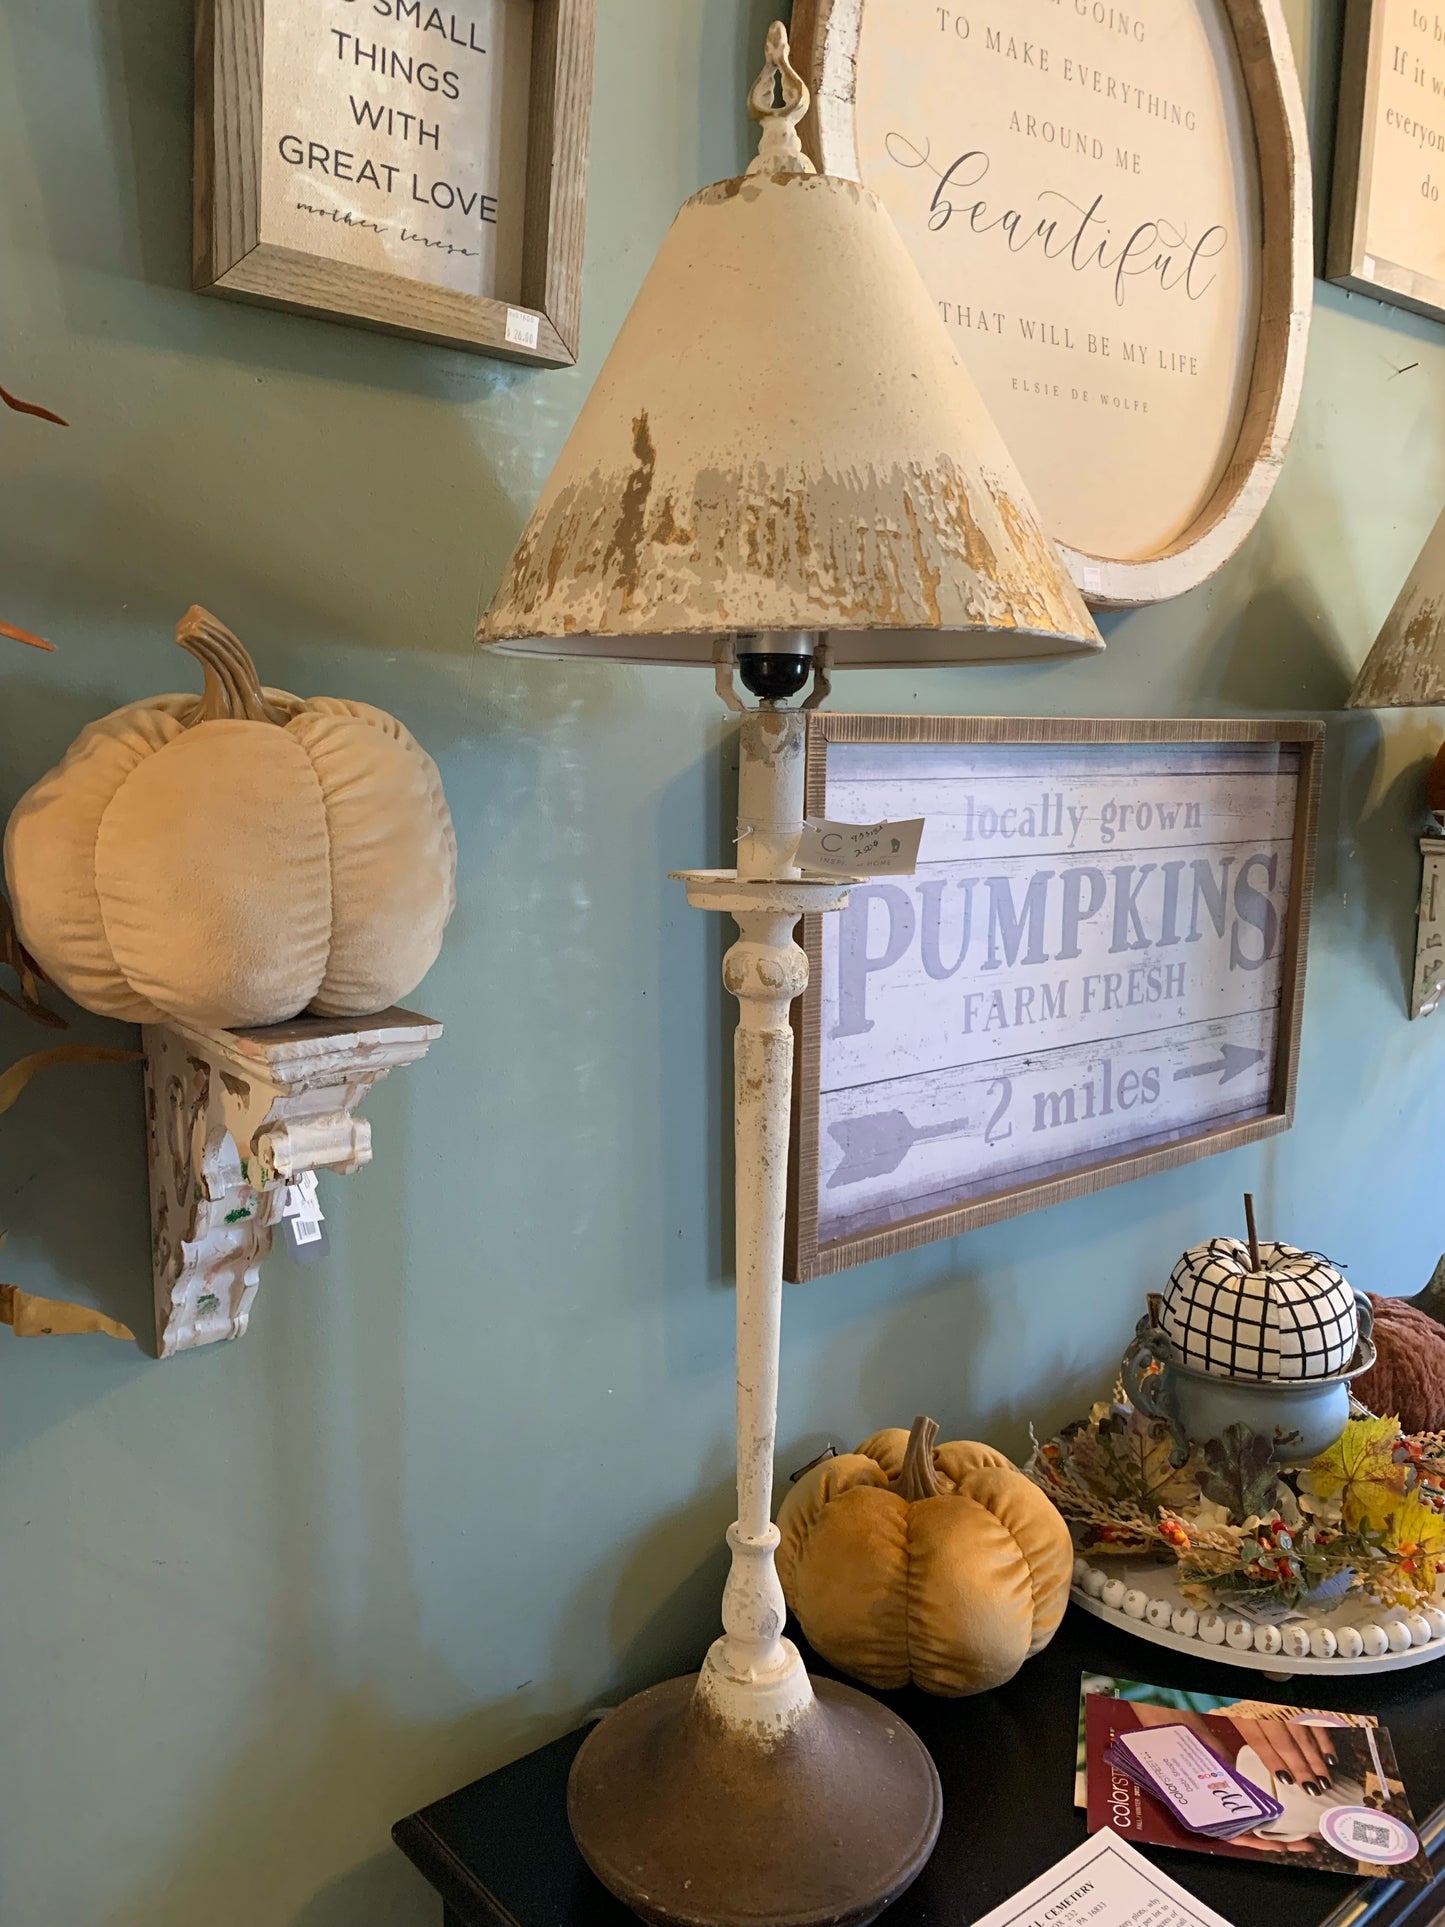 Distressed White Buffet Lamp